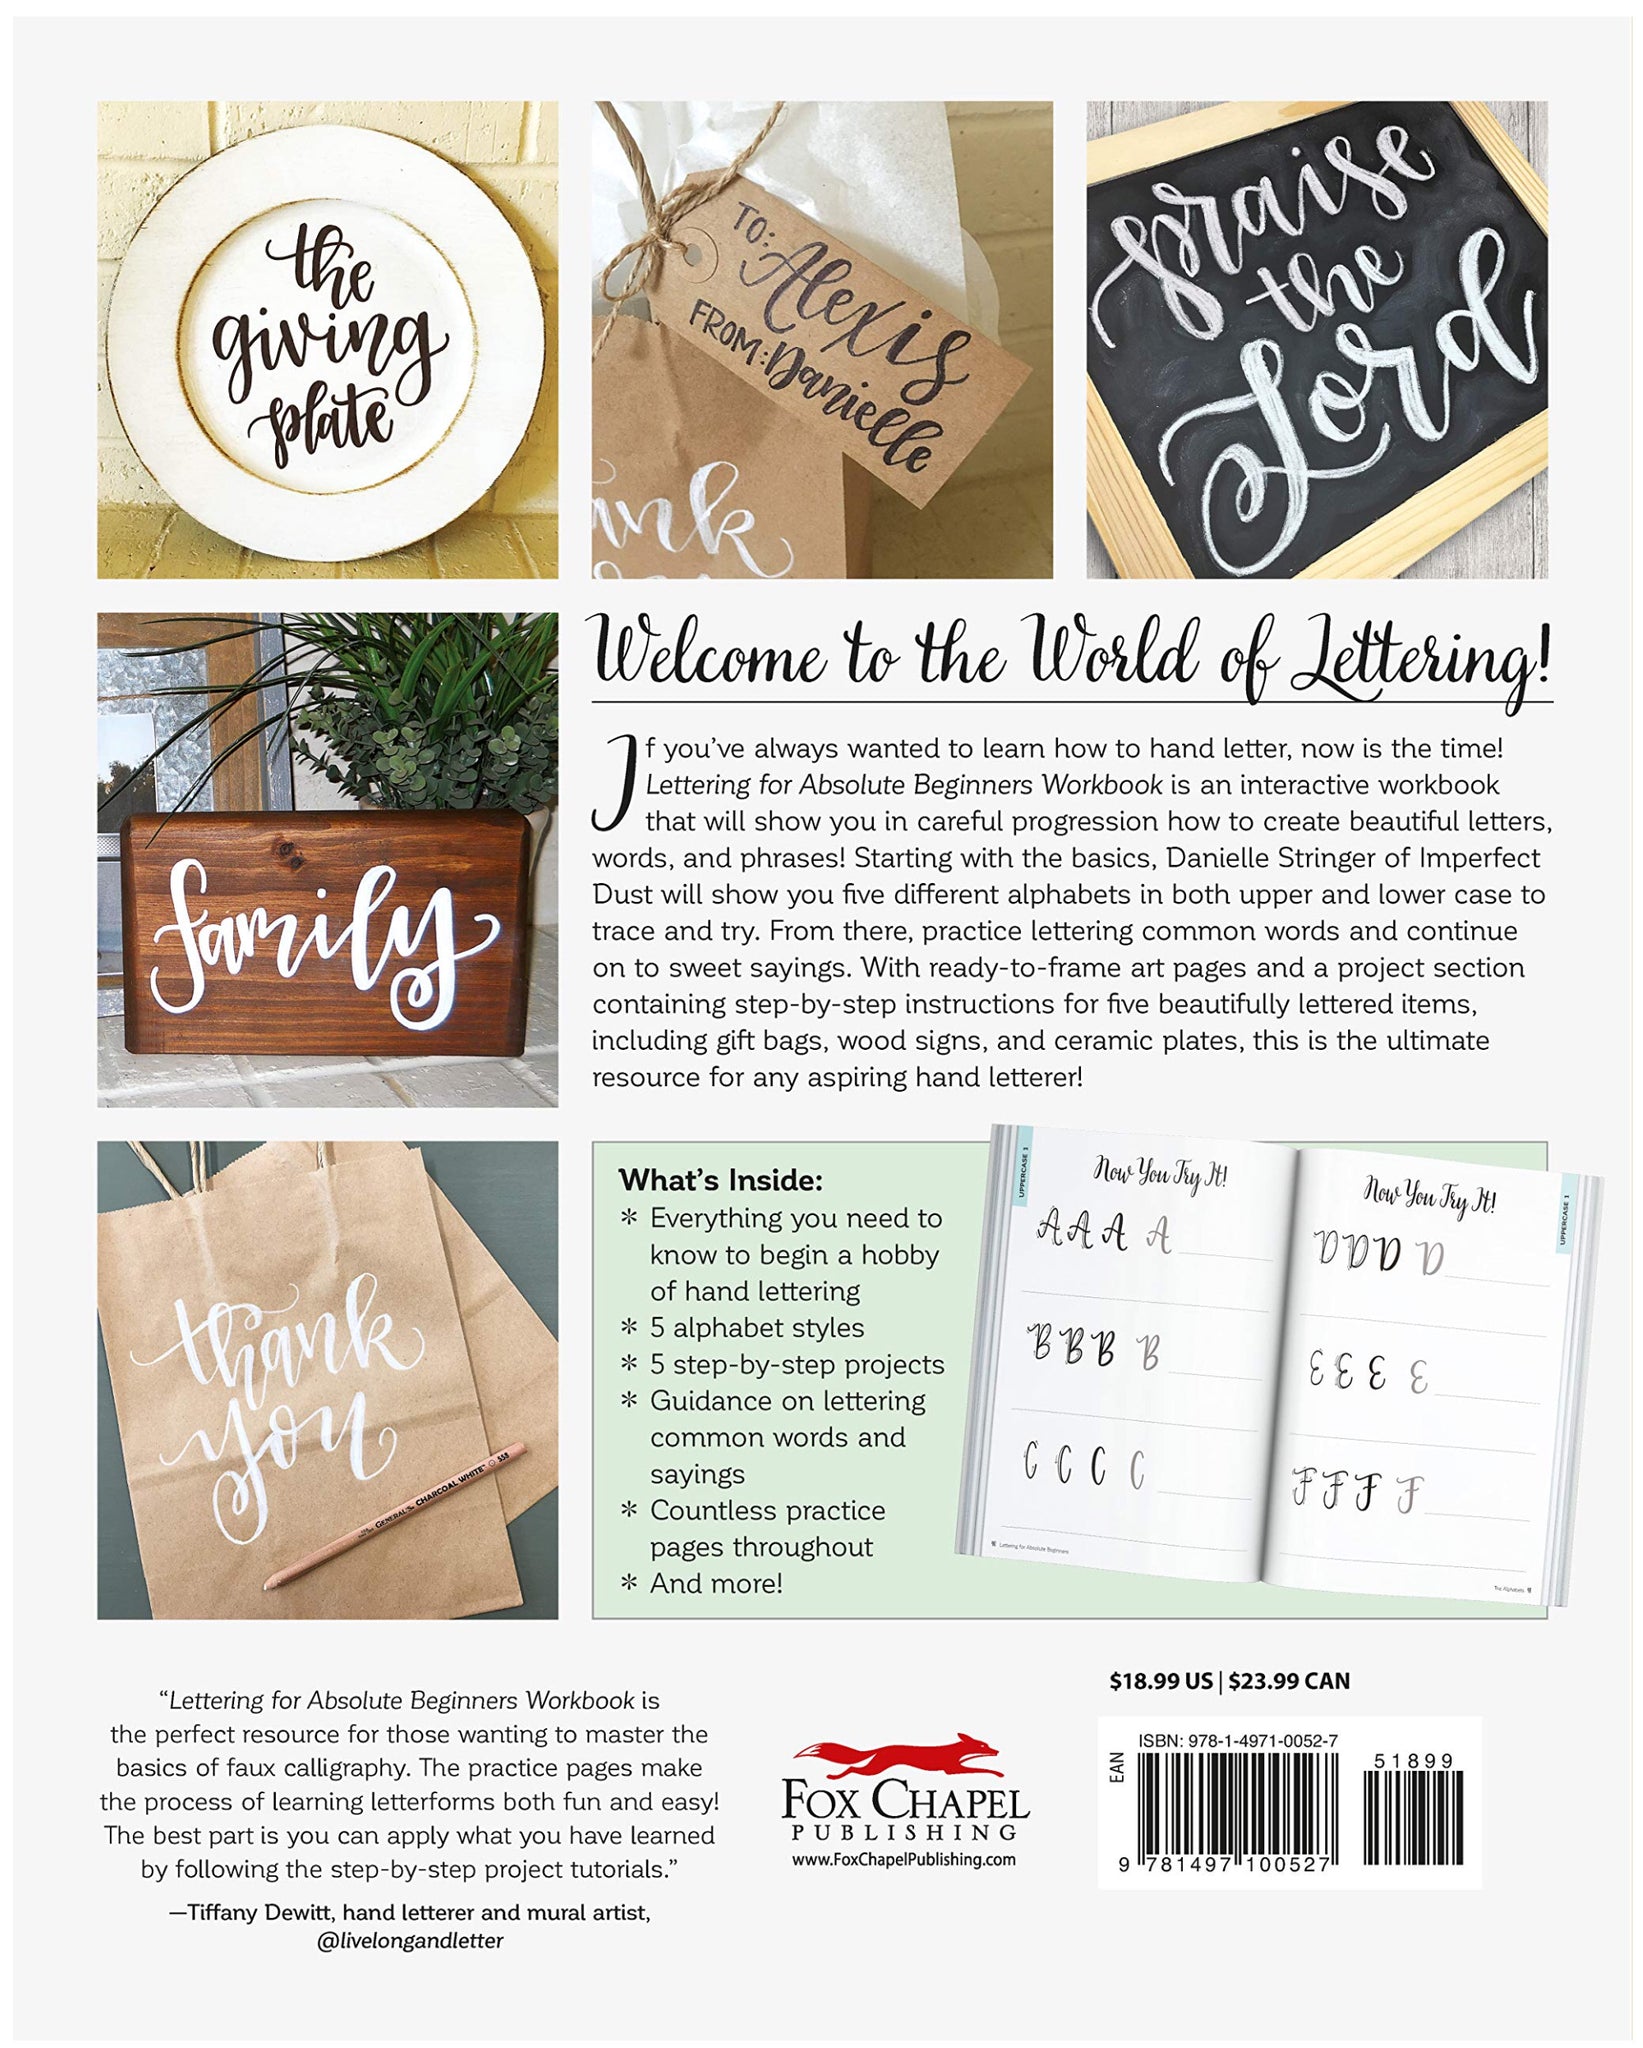 Hand-Lettering Workbook  The Whole Shabang by The Basic Life of Brooke